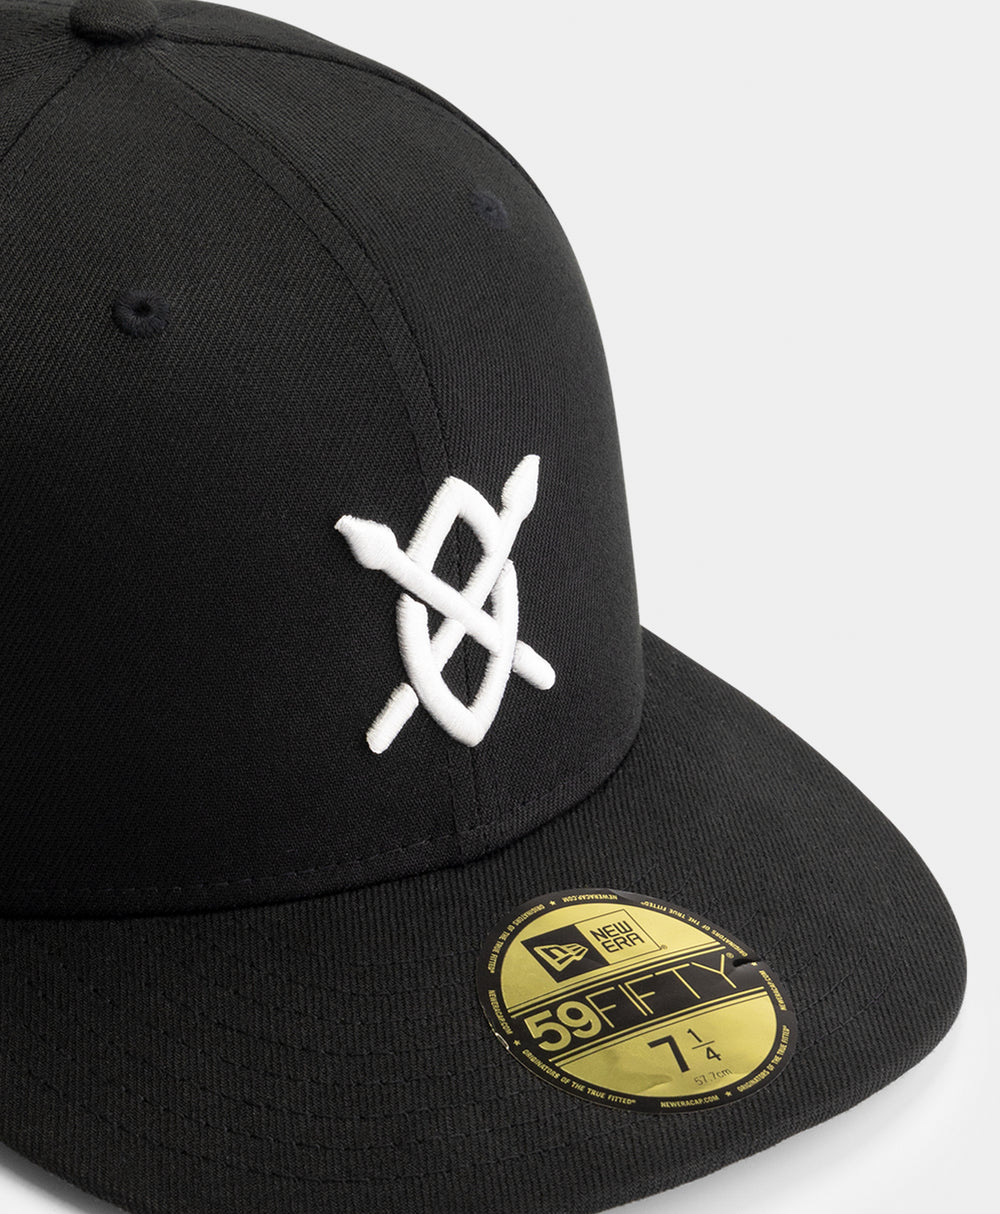 DP - Black Daily Paper x New Era 59FIFTY Fitted Cap - Packshot - Rear